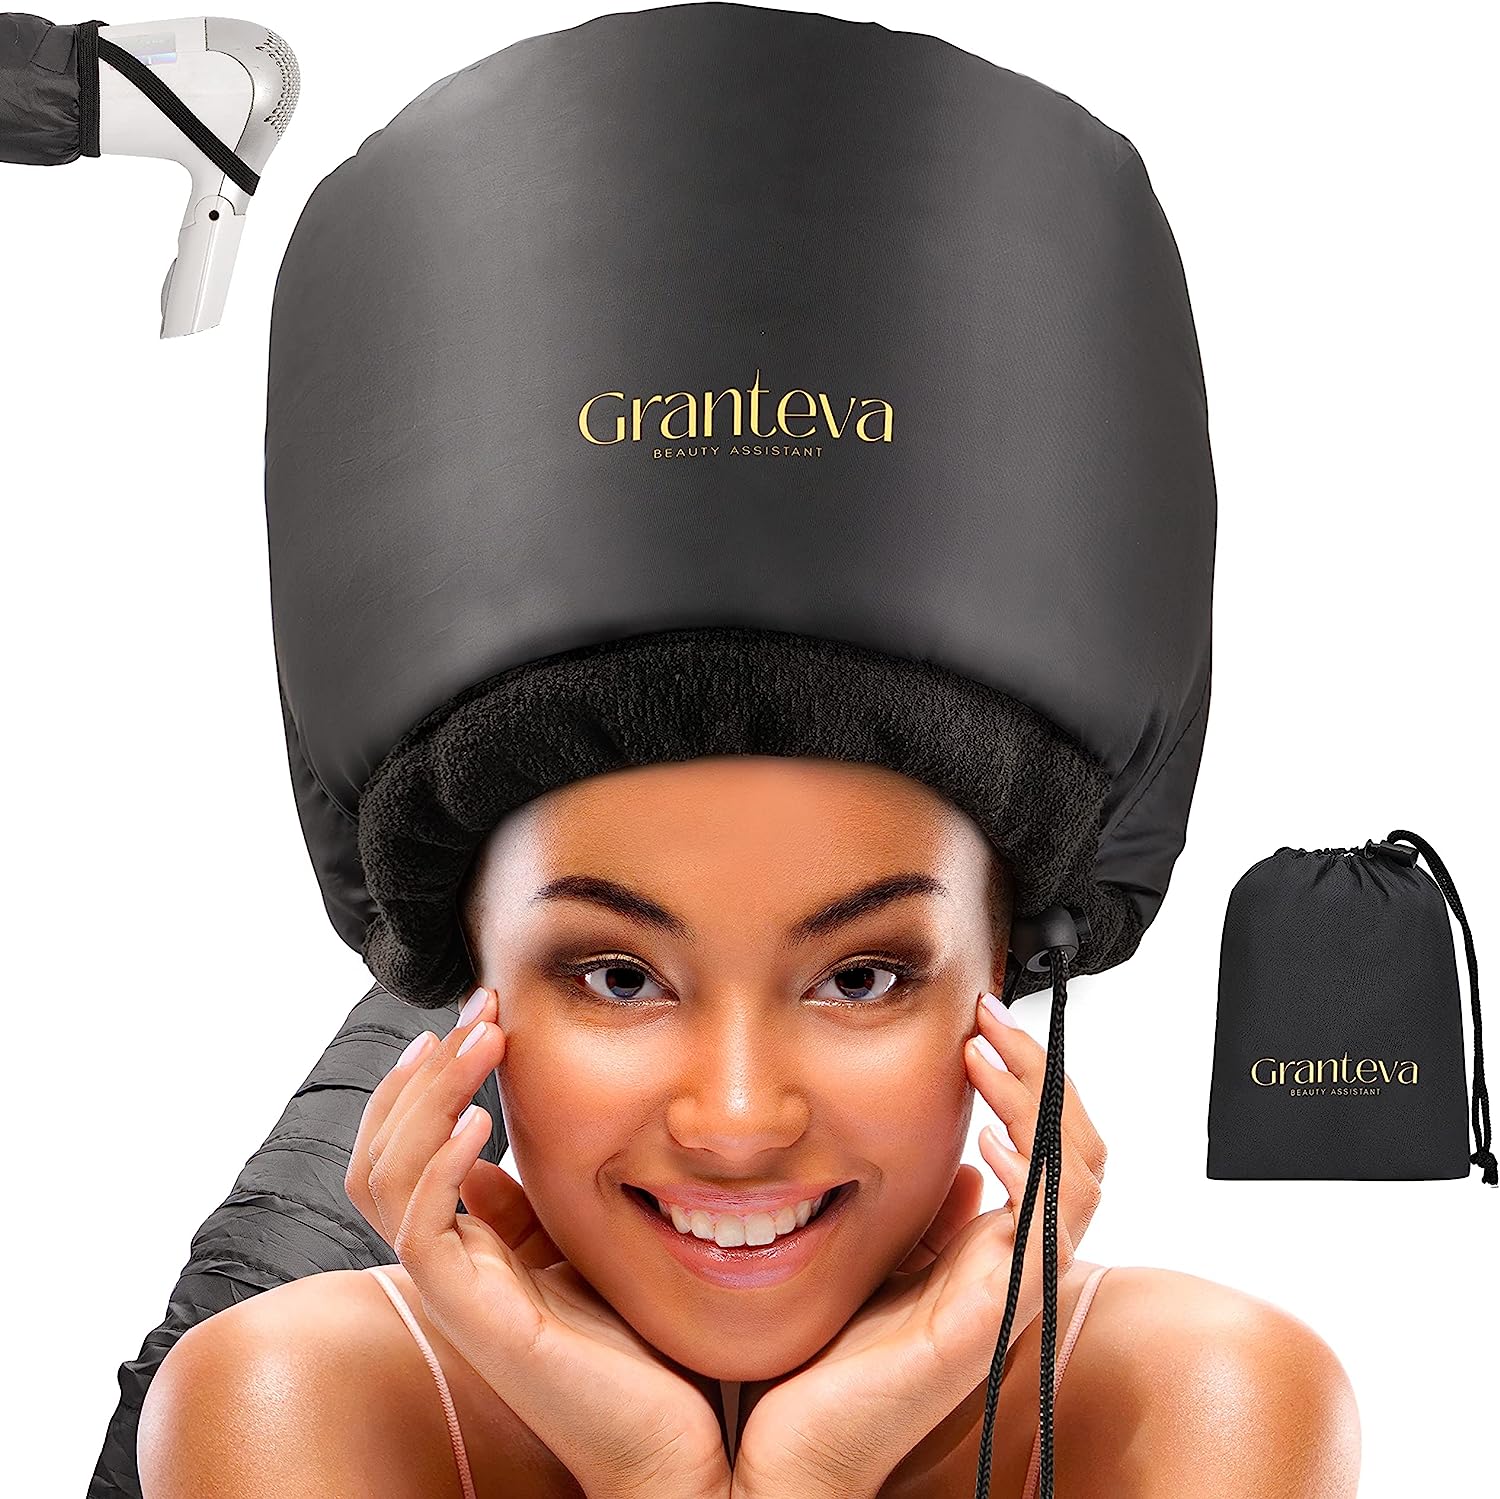 Hair Dryer Bonnet w/A Headband Integrated That Reduces [...]